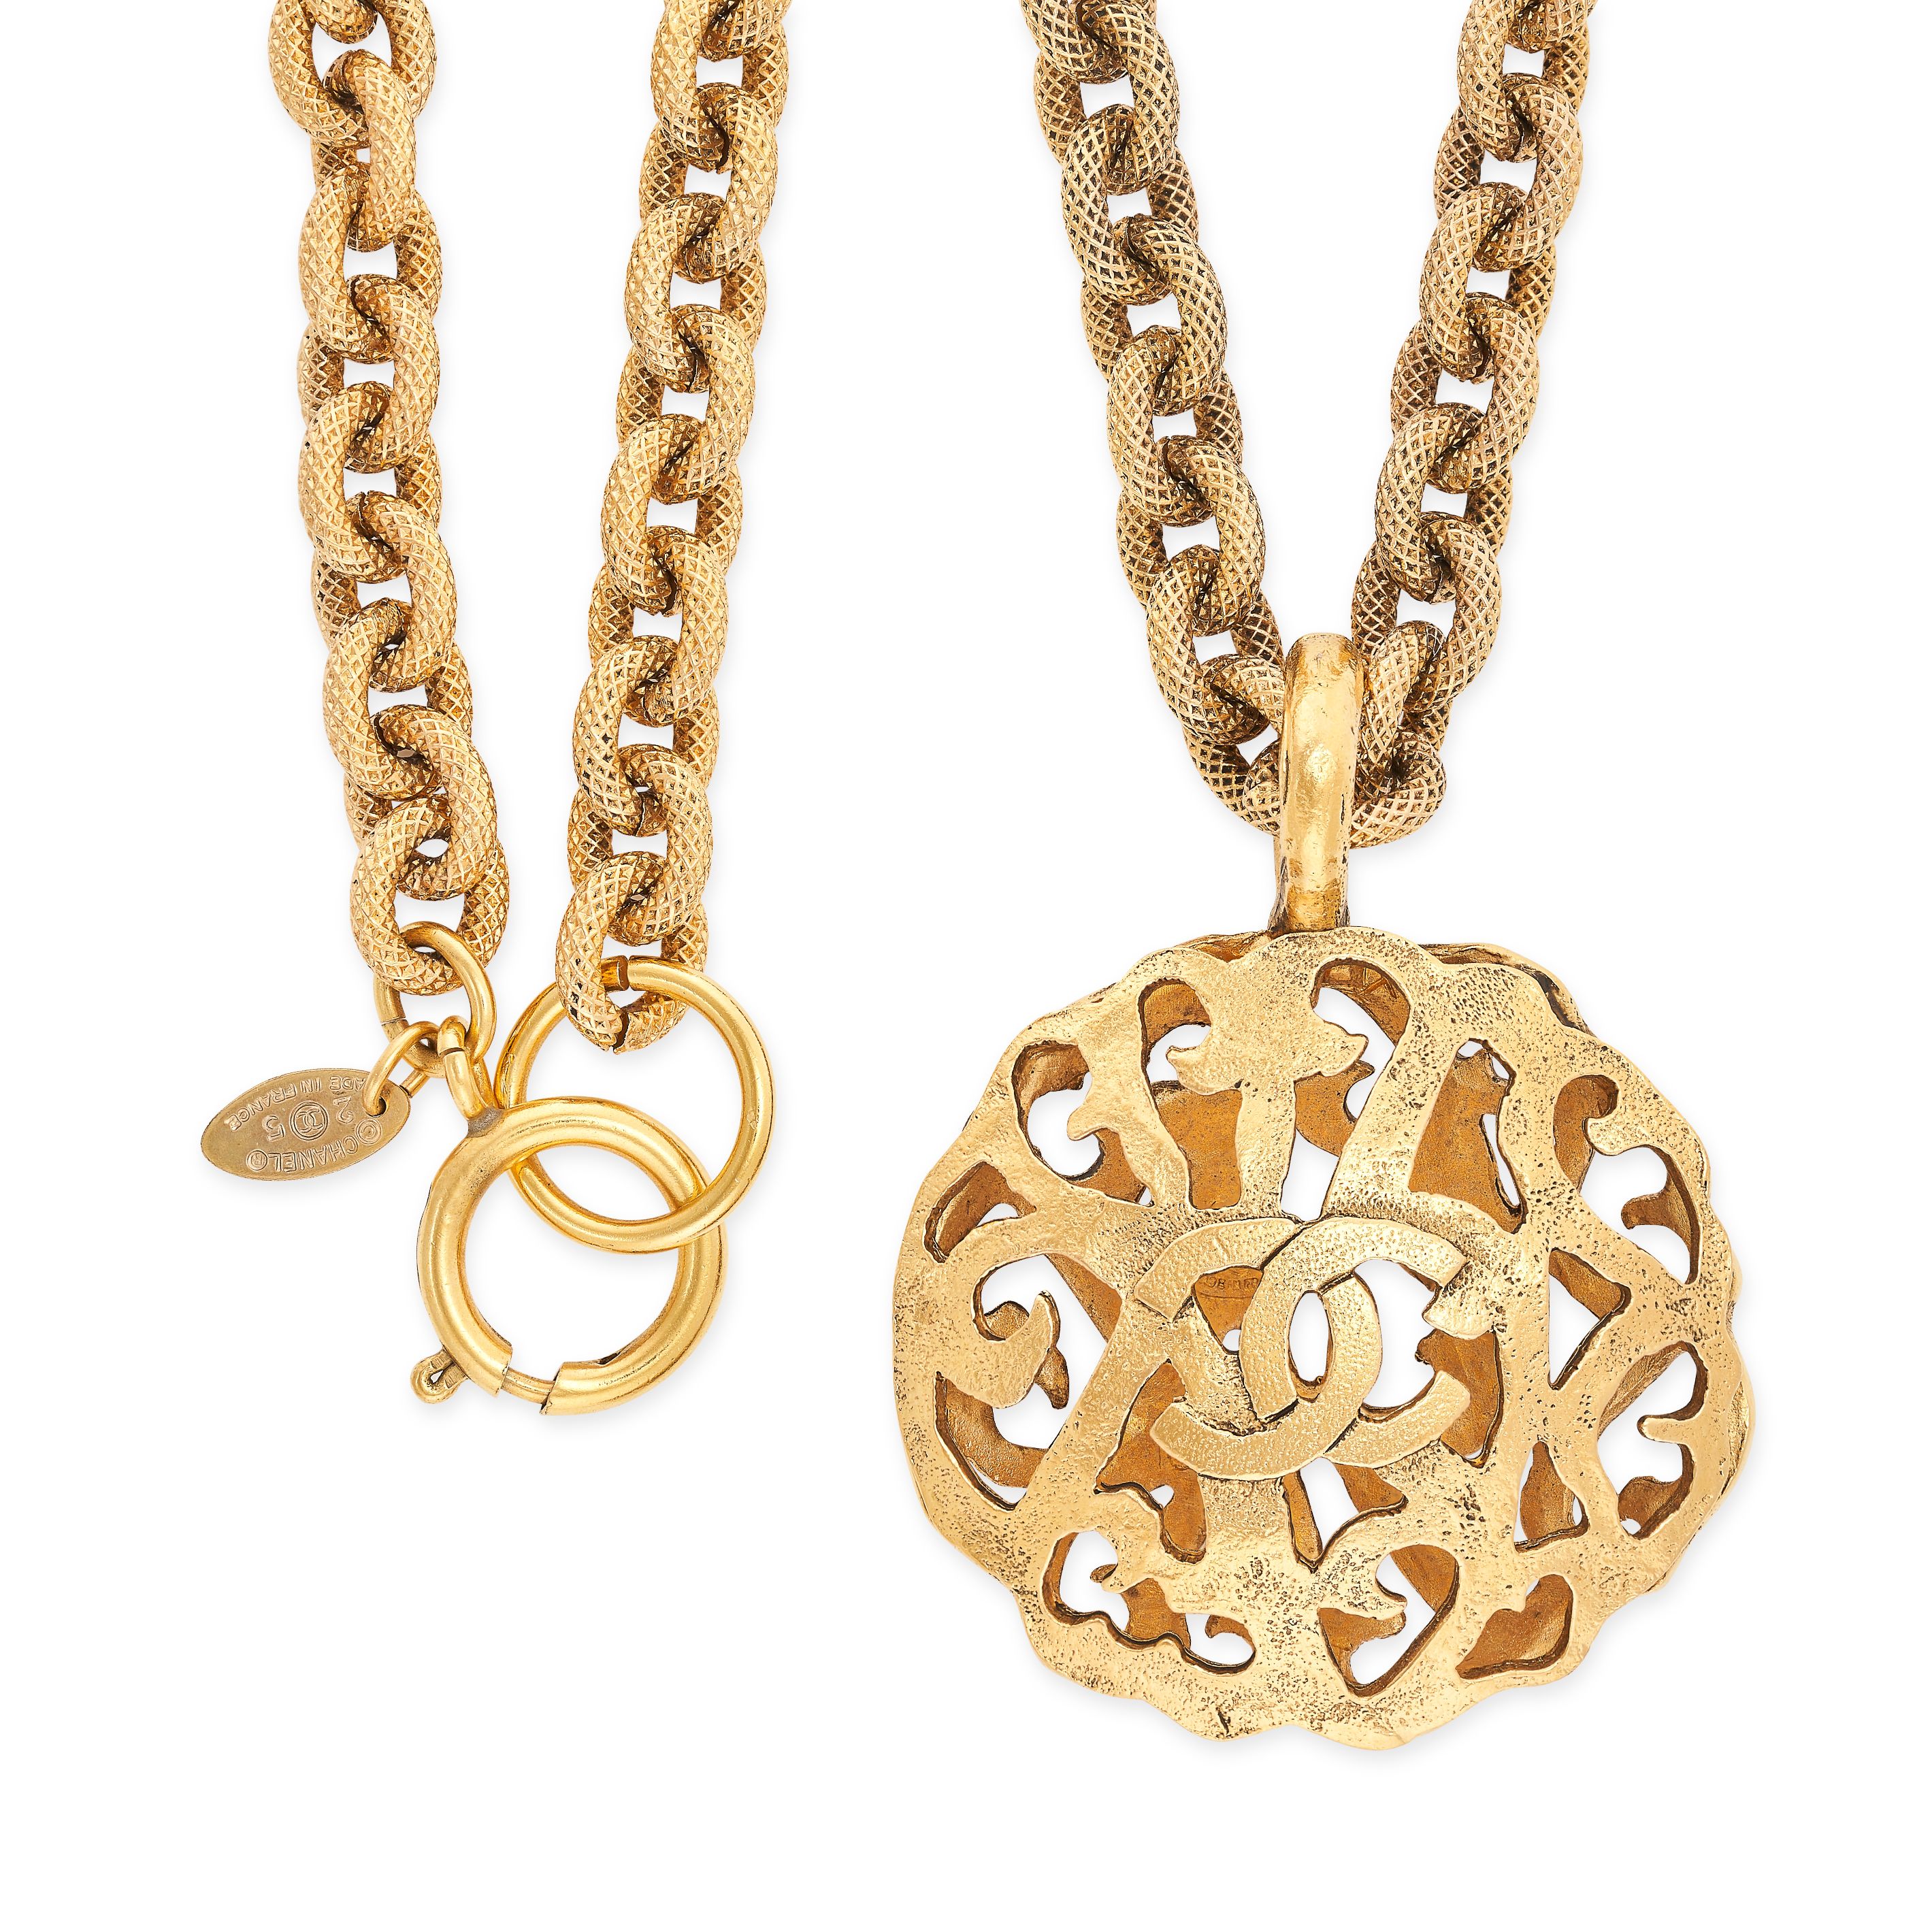 CHANEL, A VINTAGE PENDANT AND CHAIN comprising an openwork pendant with interlocking CC motifs,